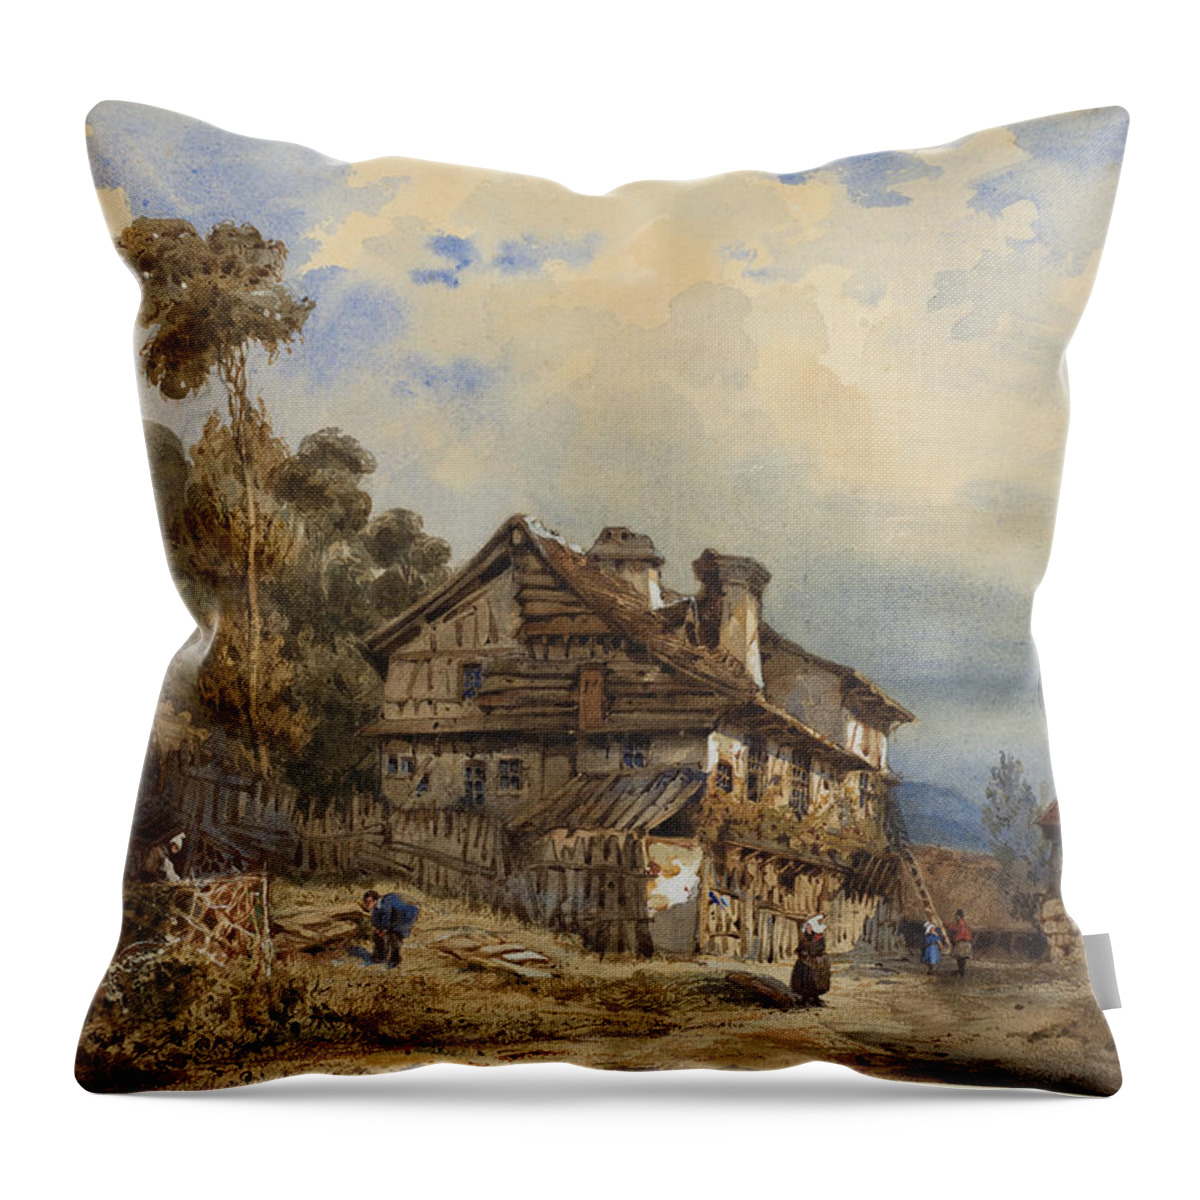 Rustic Landscape Throw Pillow by French 19th Century - Pixels